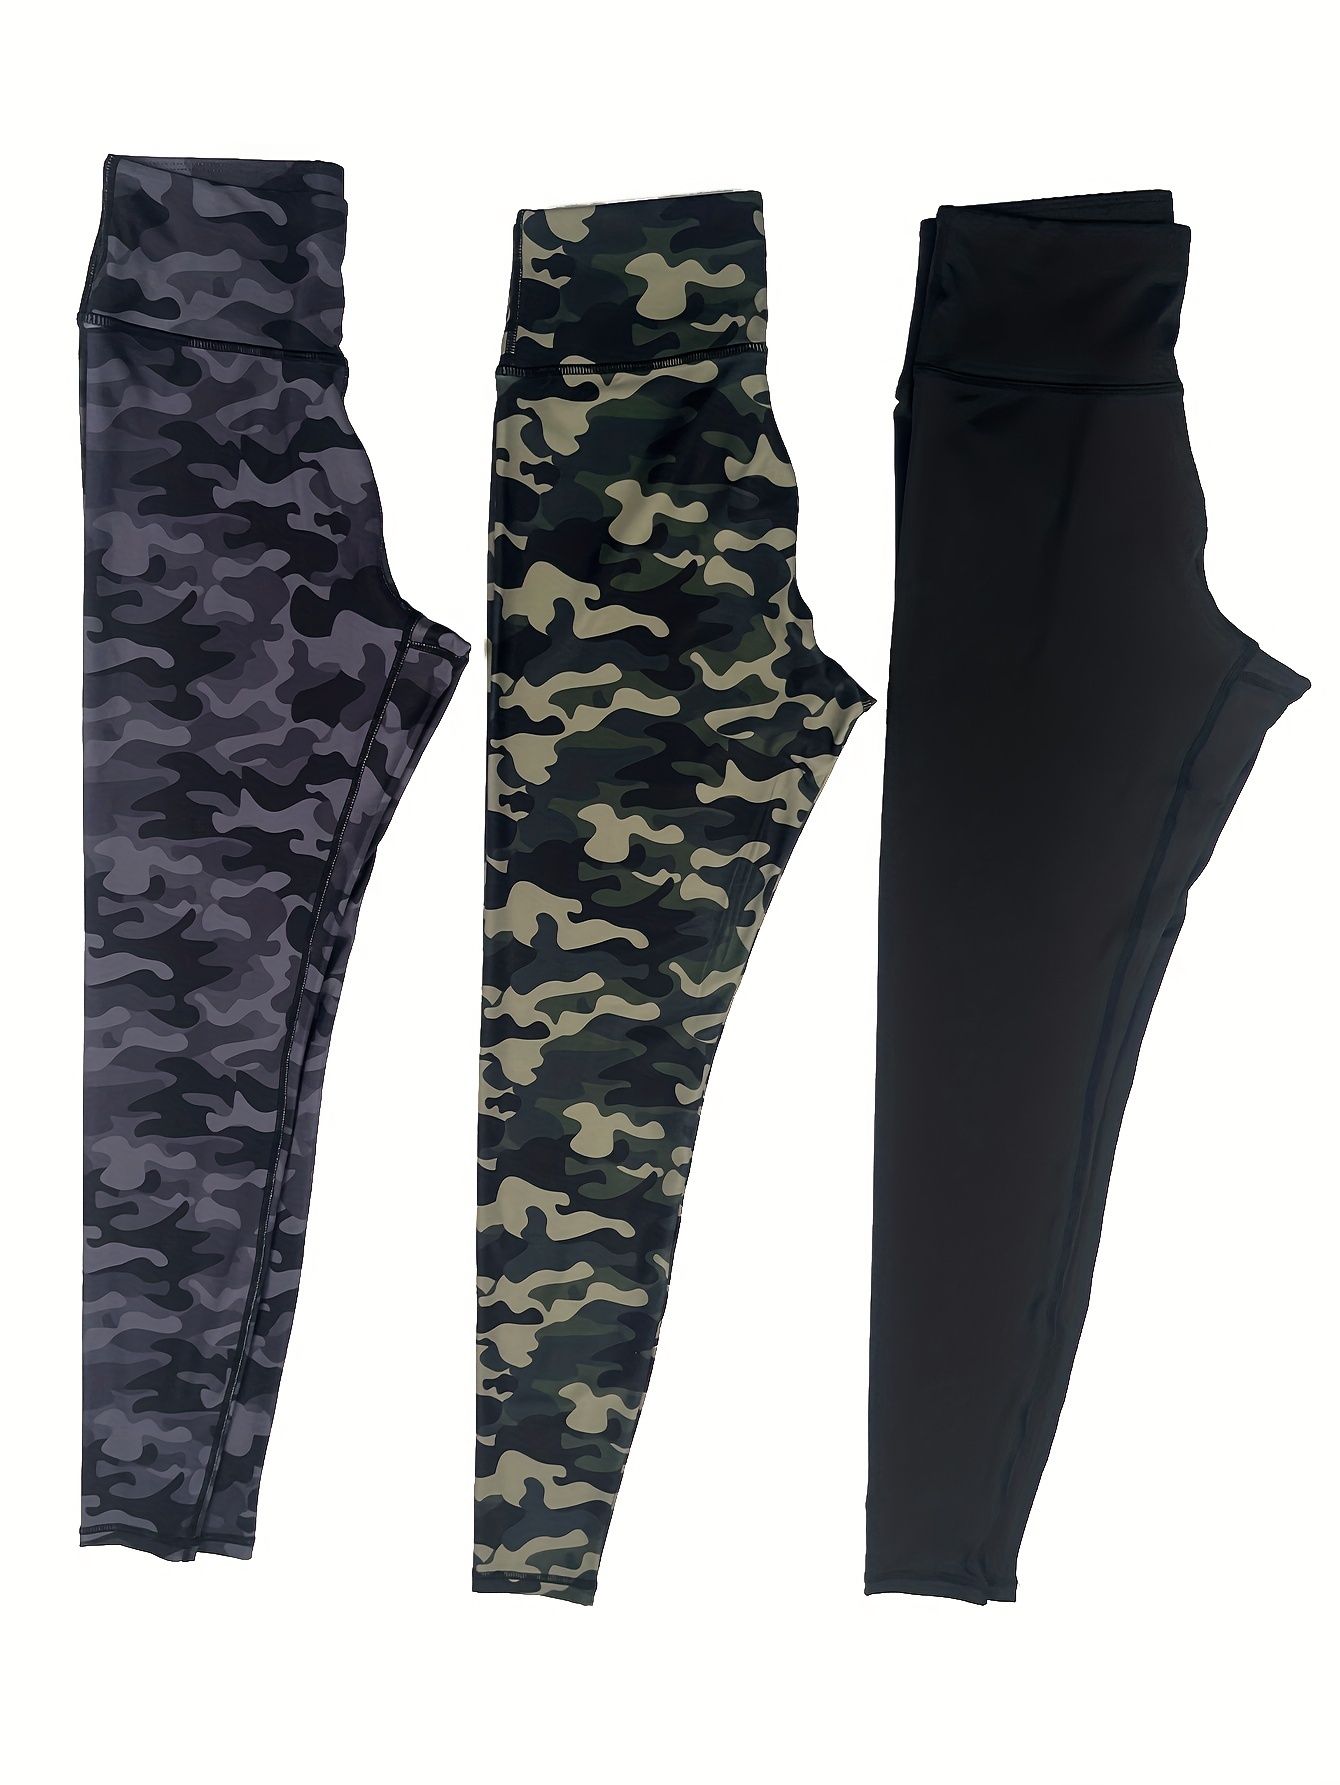 Best Tuff Athletics Size Small Black And Grey Camo Leggings From